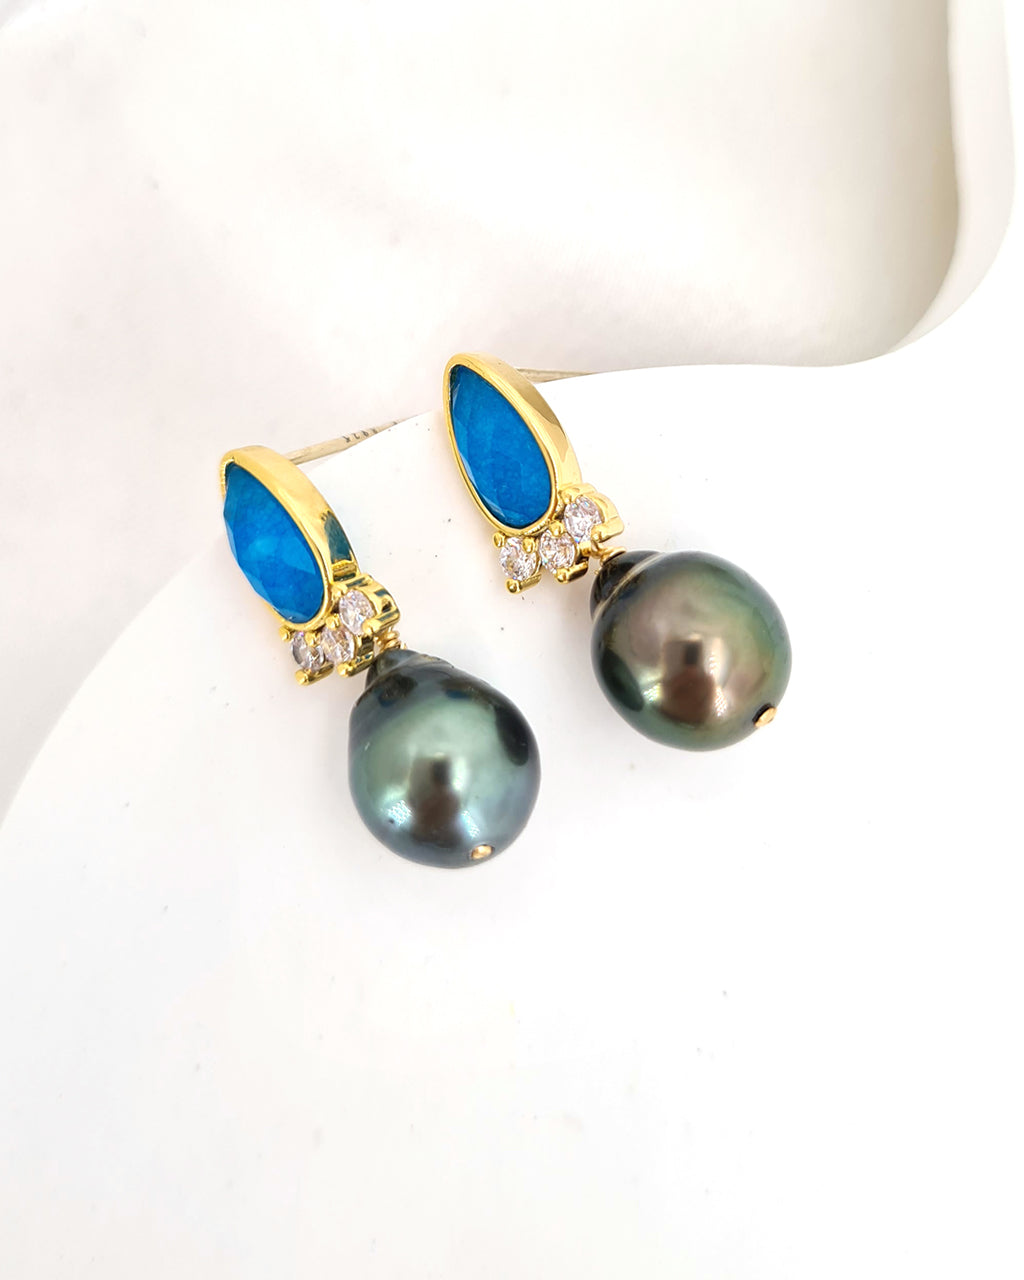 Tahitian Pearl Earrings | Something Blue Jewelry for Brides